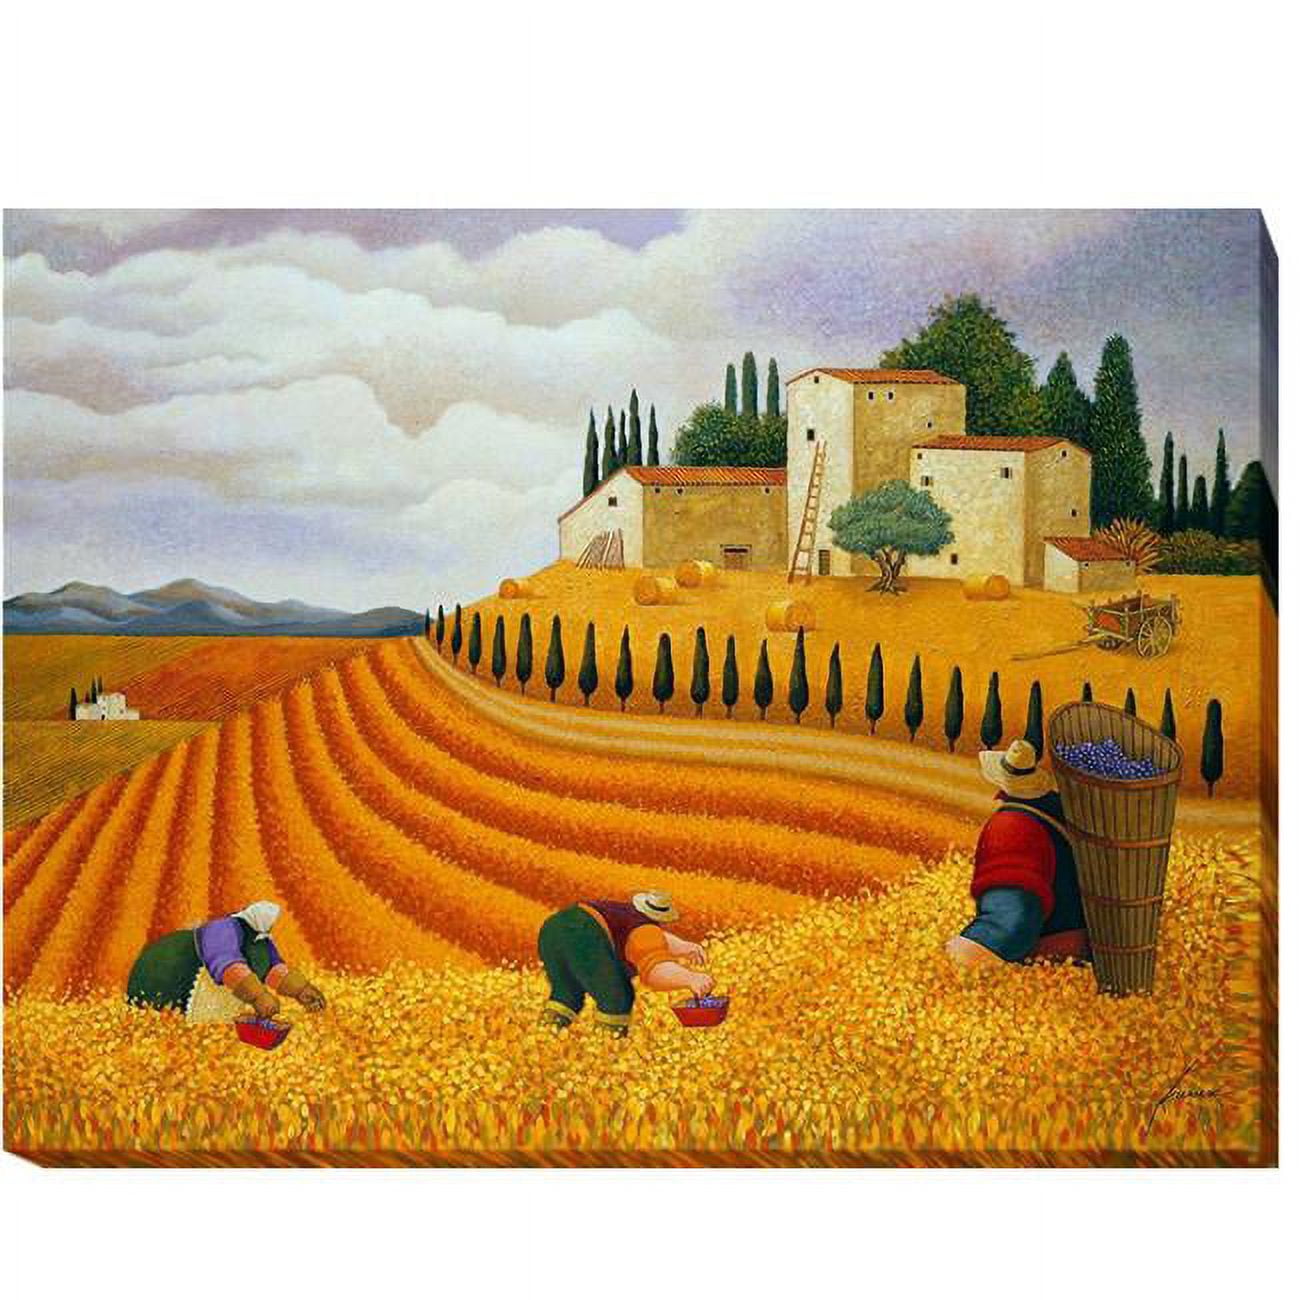 1216p394ig Village Harvest By Lowell Herrero Premium Gallery-wrapped Canvas Giclee Art - 12 X 16 X 1.5 In.